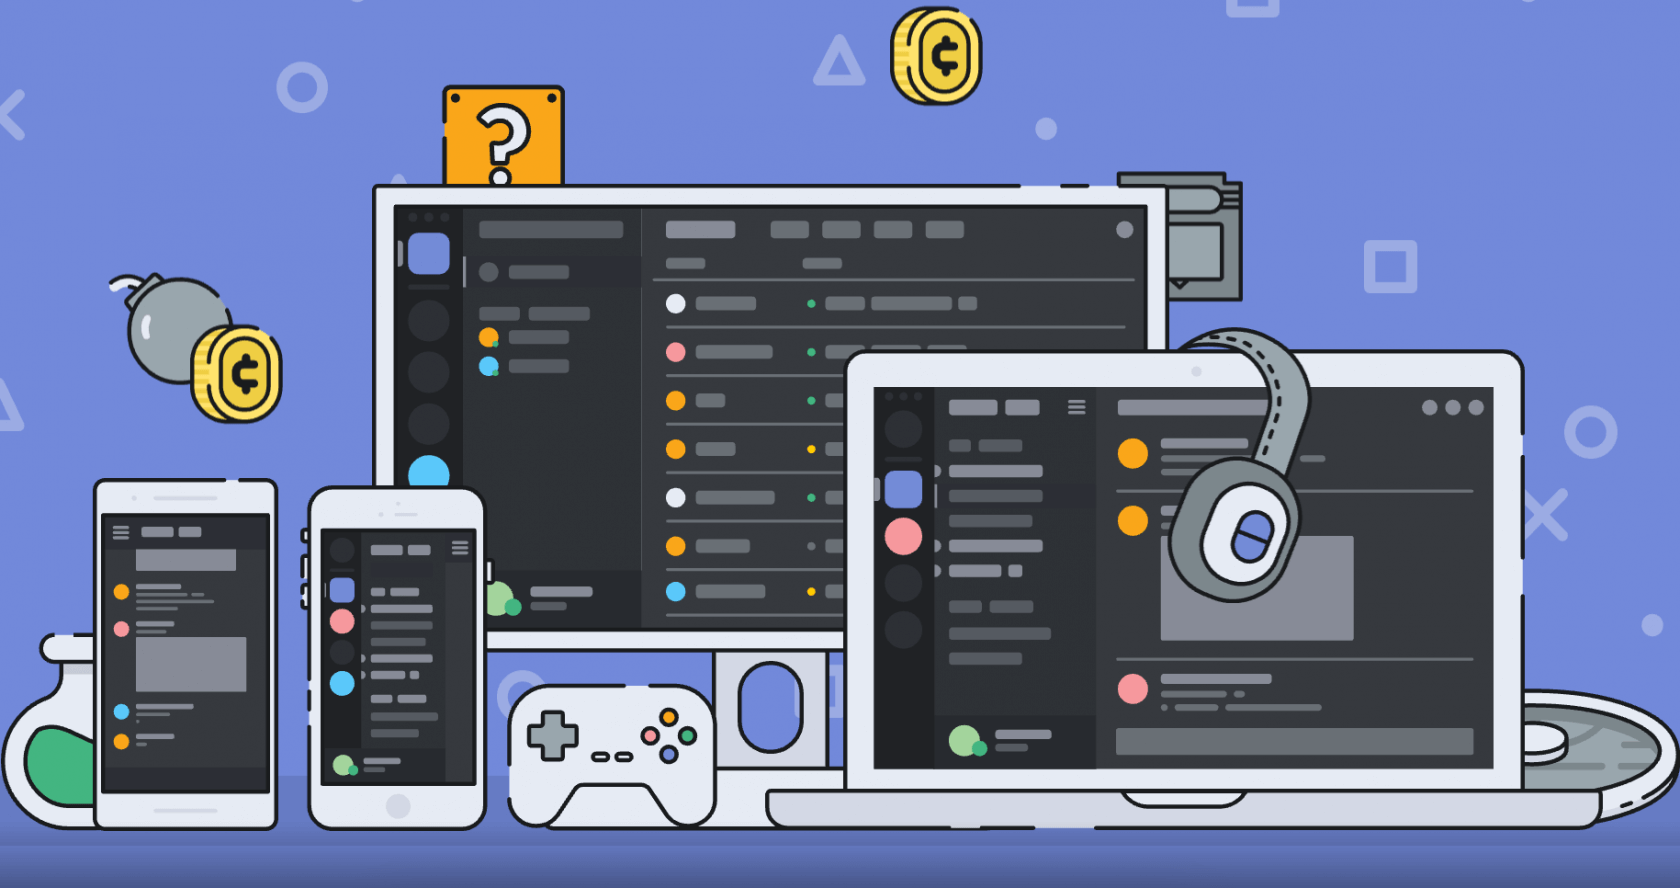 Discord now offers 'Early Access' games through its digital storefront